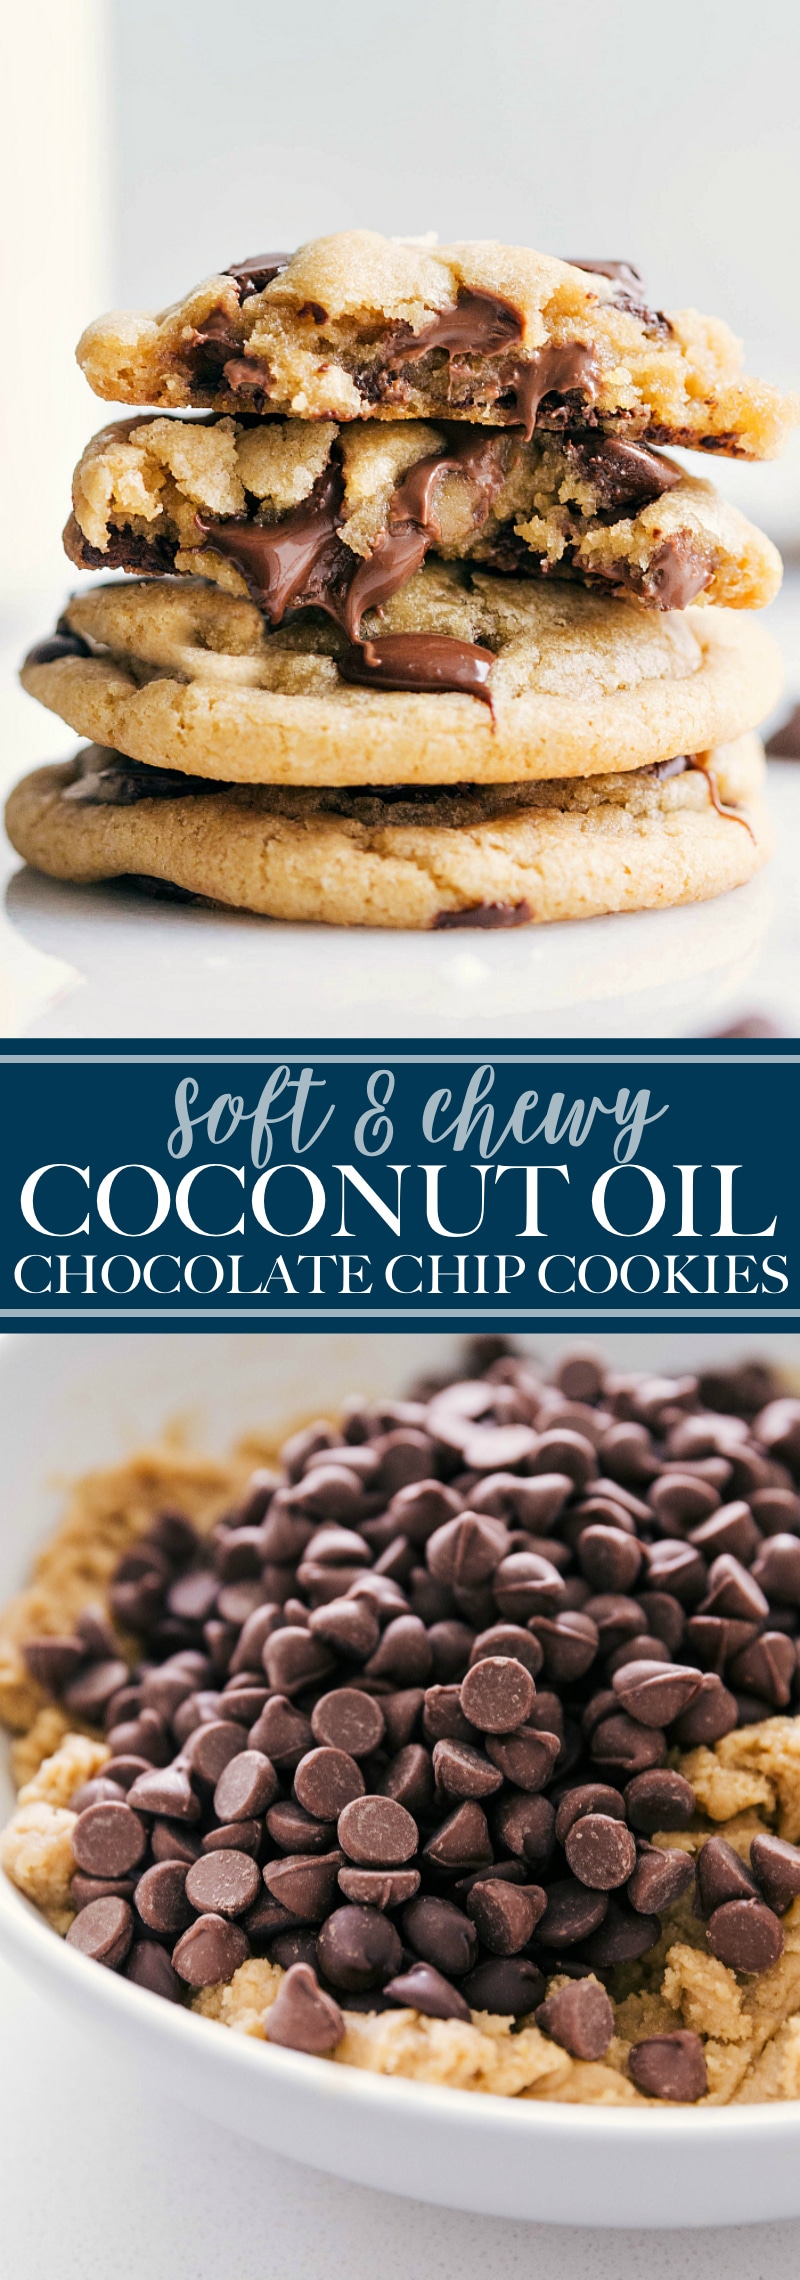 Deliciously crisp-on-the-outside and chewy in the inside: coconut oil chocolate chip cookies and all my tips/tricks to make these cookies delicious every time! via chelseasmessyapron.com #coconut #oil #chocolate #chip #cookies #easy #quick #recipe #cookie #dessert #holiday #christmas #kid #friendly